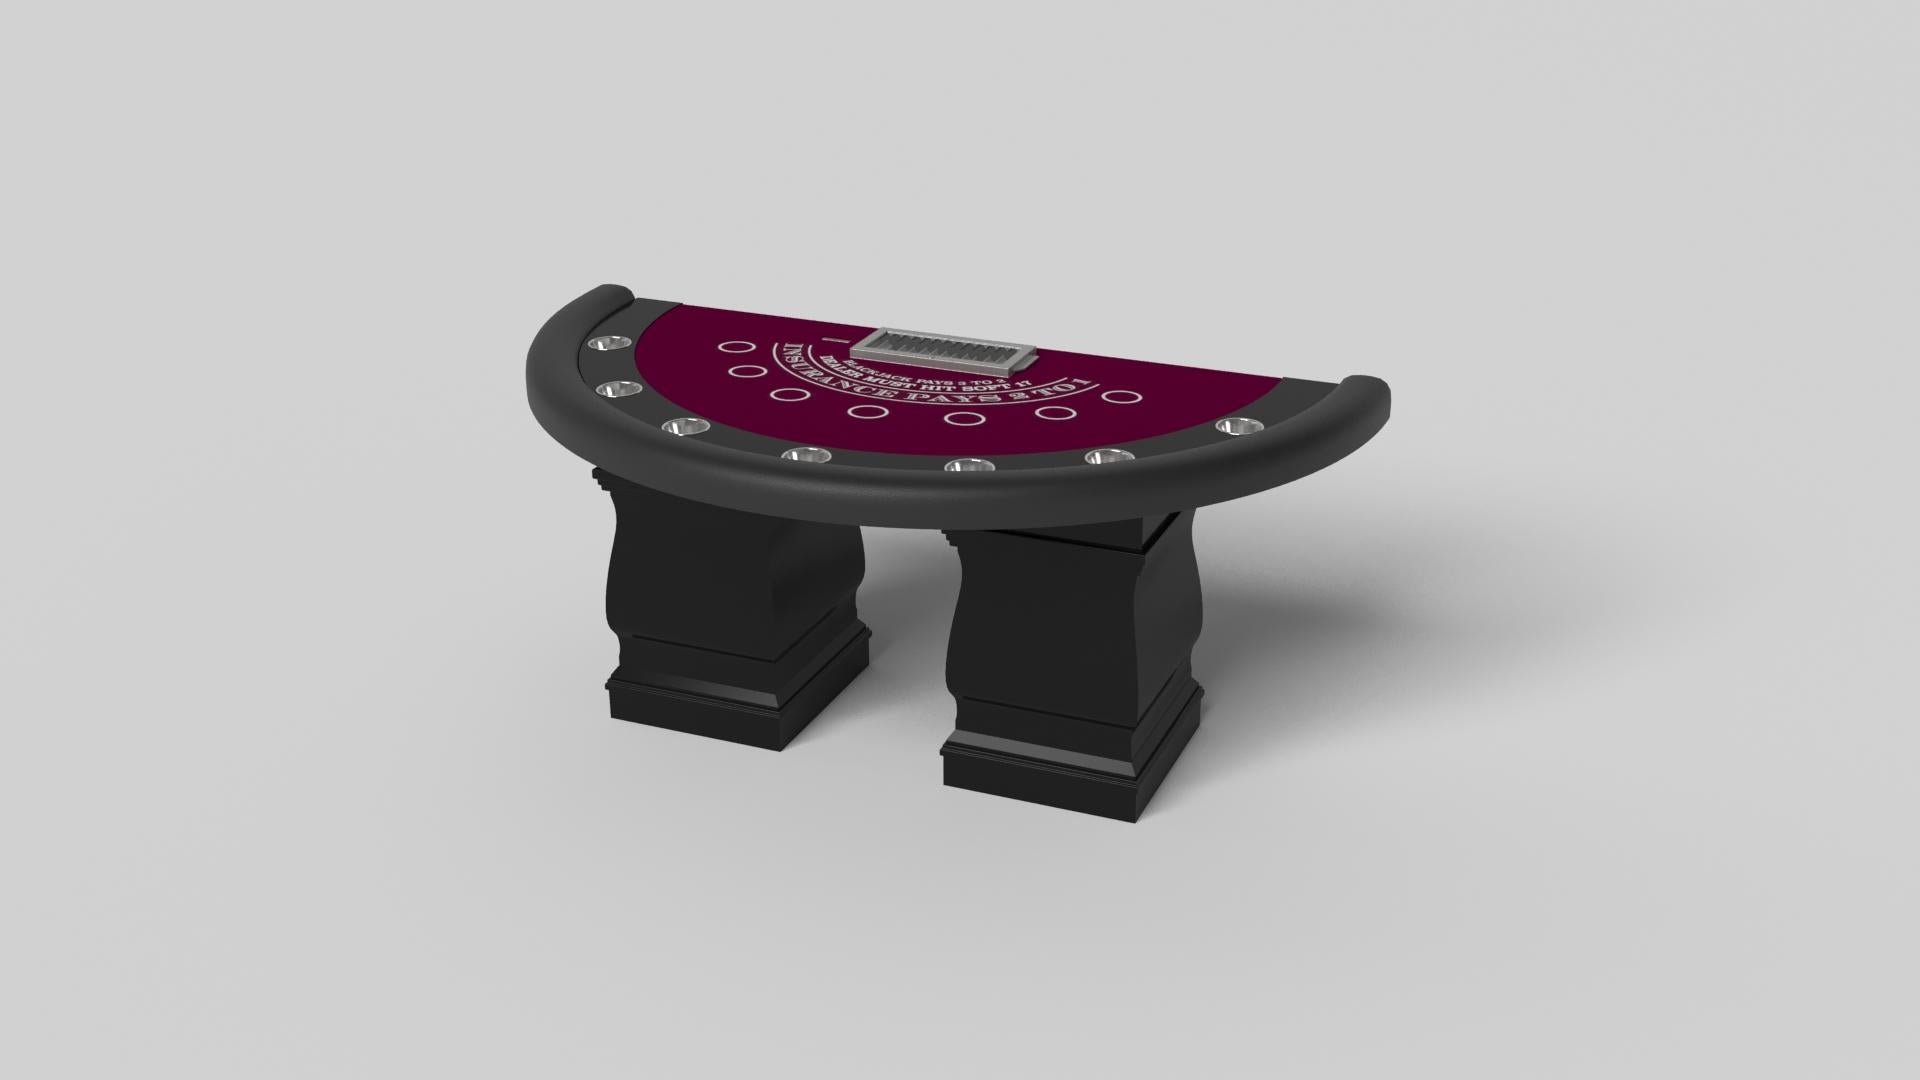 Two hand-sculpted legs bestow a sense of classic style upon the Baluster blackjack table in white. This luxury game table features a semicircular top perched upon two wide baluster column legs that mimic the curves and lines of crown molding. It’s a